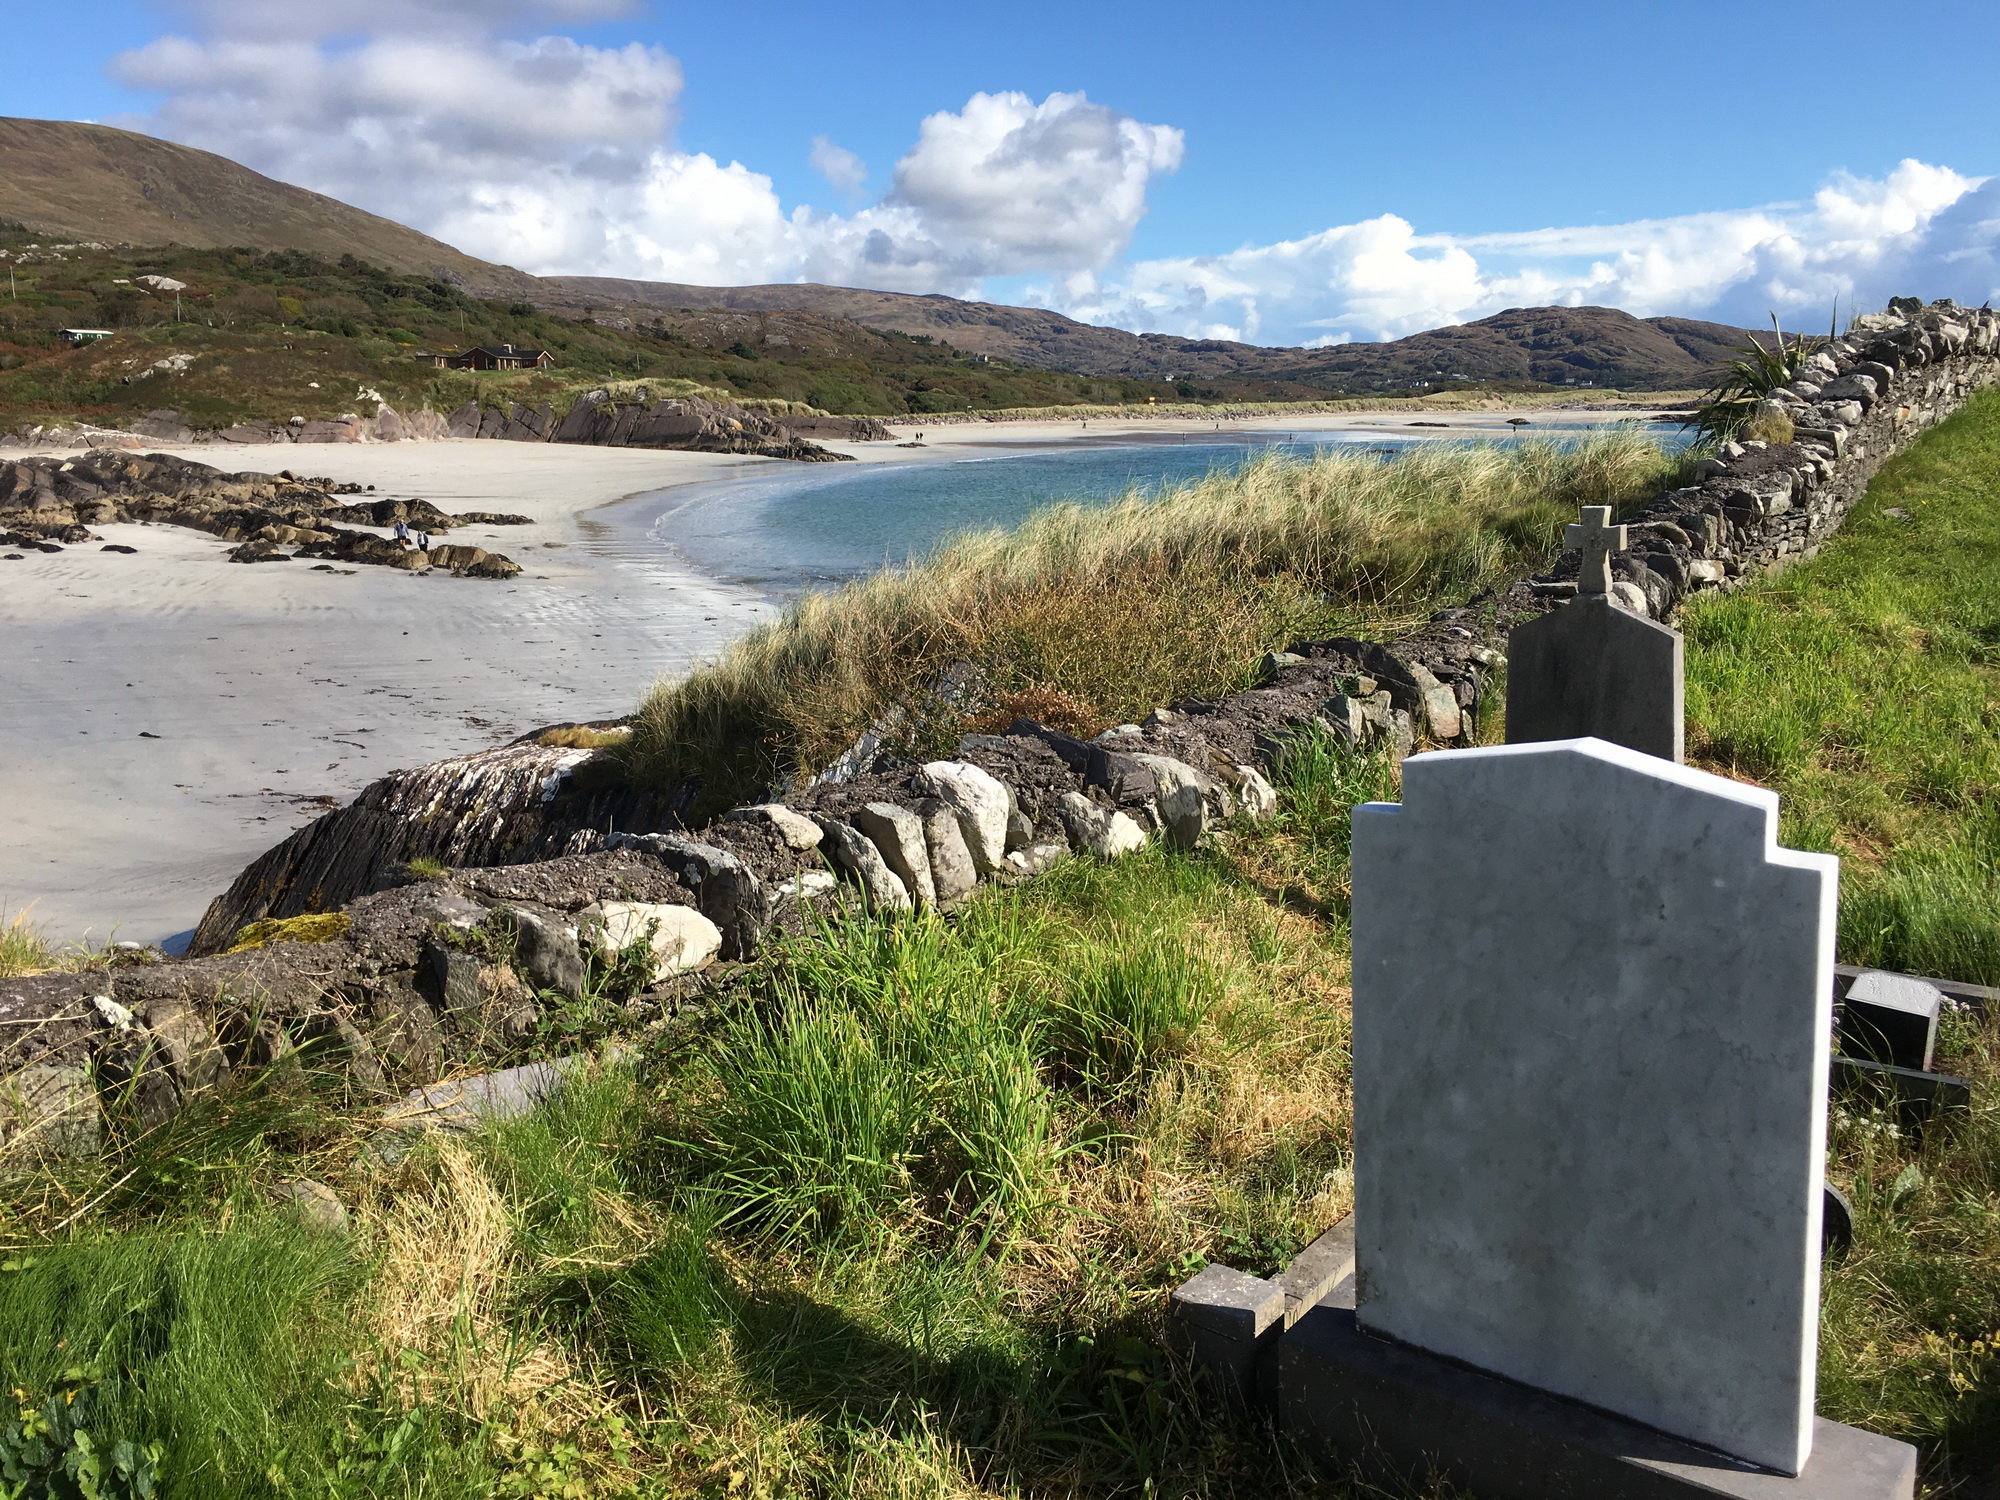 Derrynane Abbey Cemetery, Part of the Ring of Kerry, Ireland